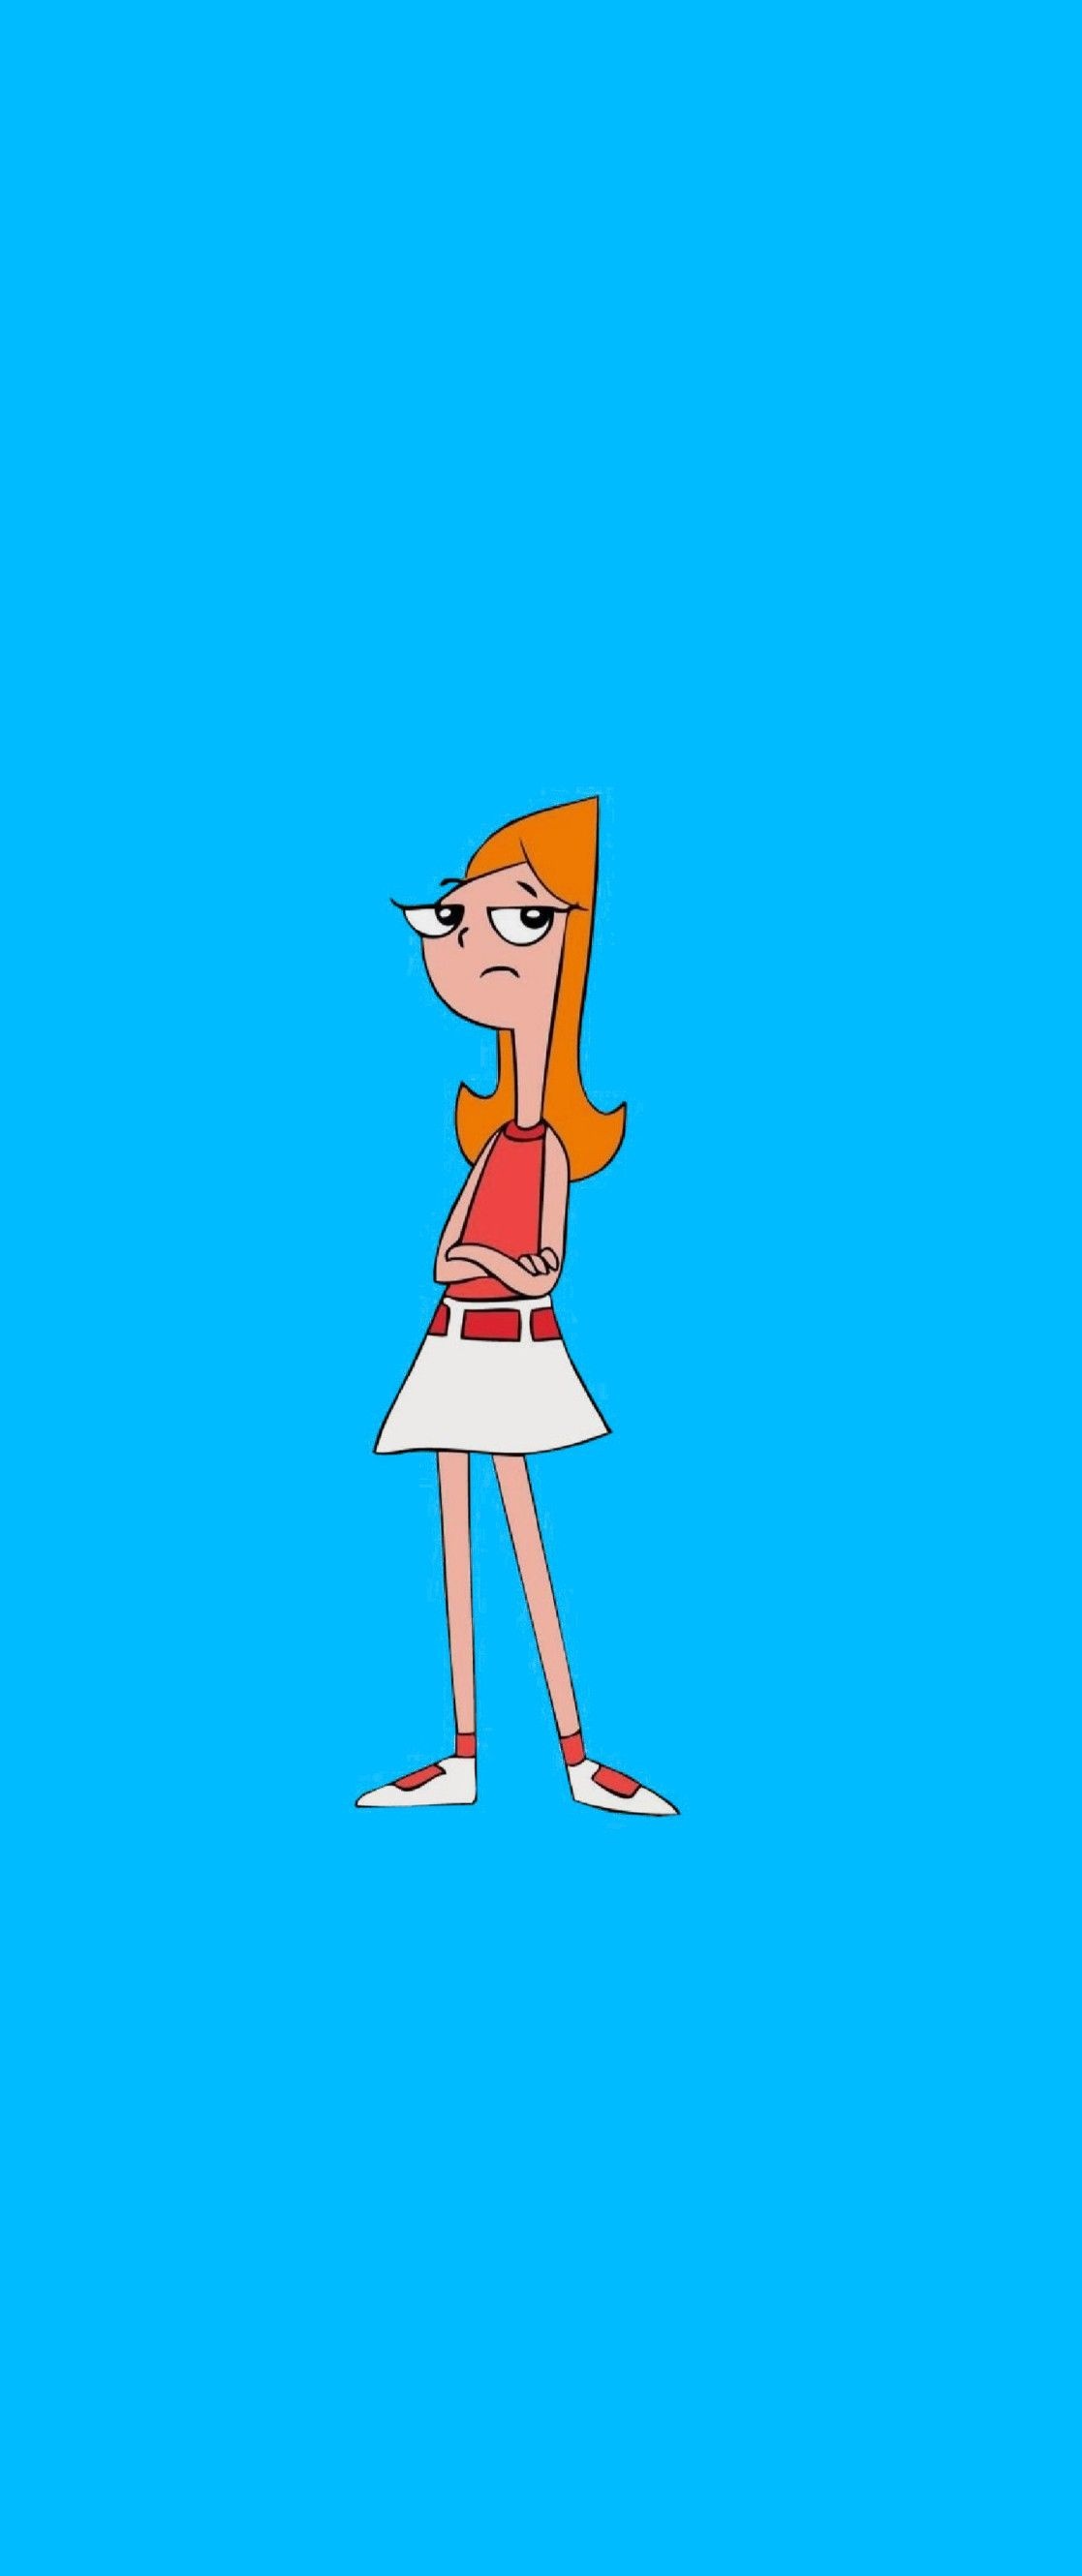 Candice, Phineas and Ferb wallpaper, Phineas and Ferb, Cartoon wallpaper, 1120x2660 HD Handy